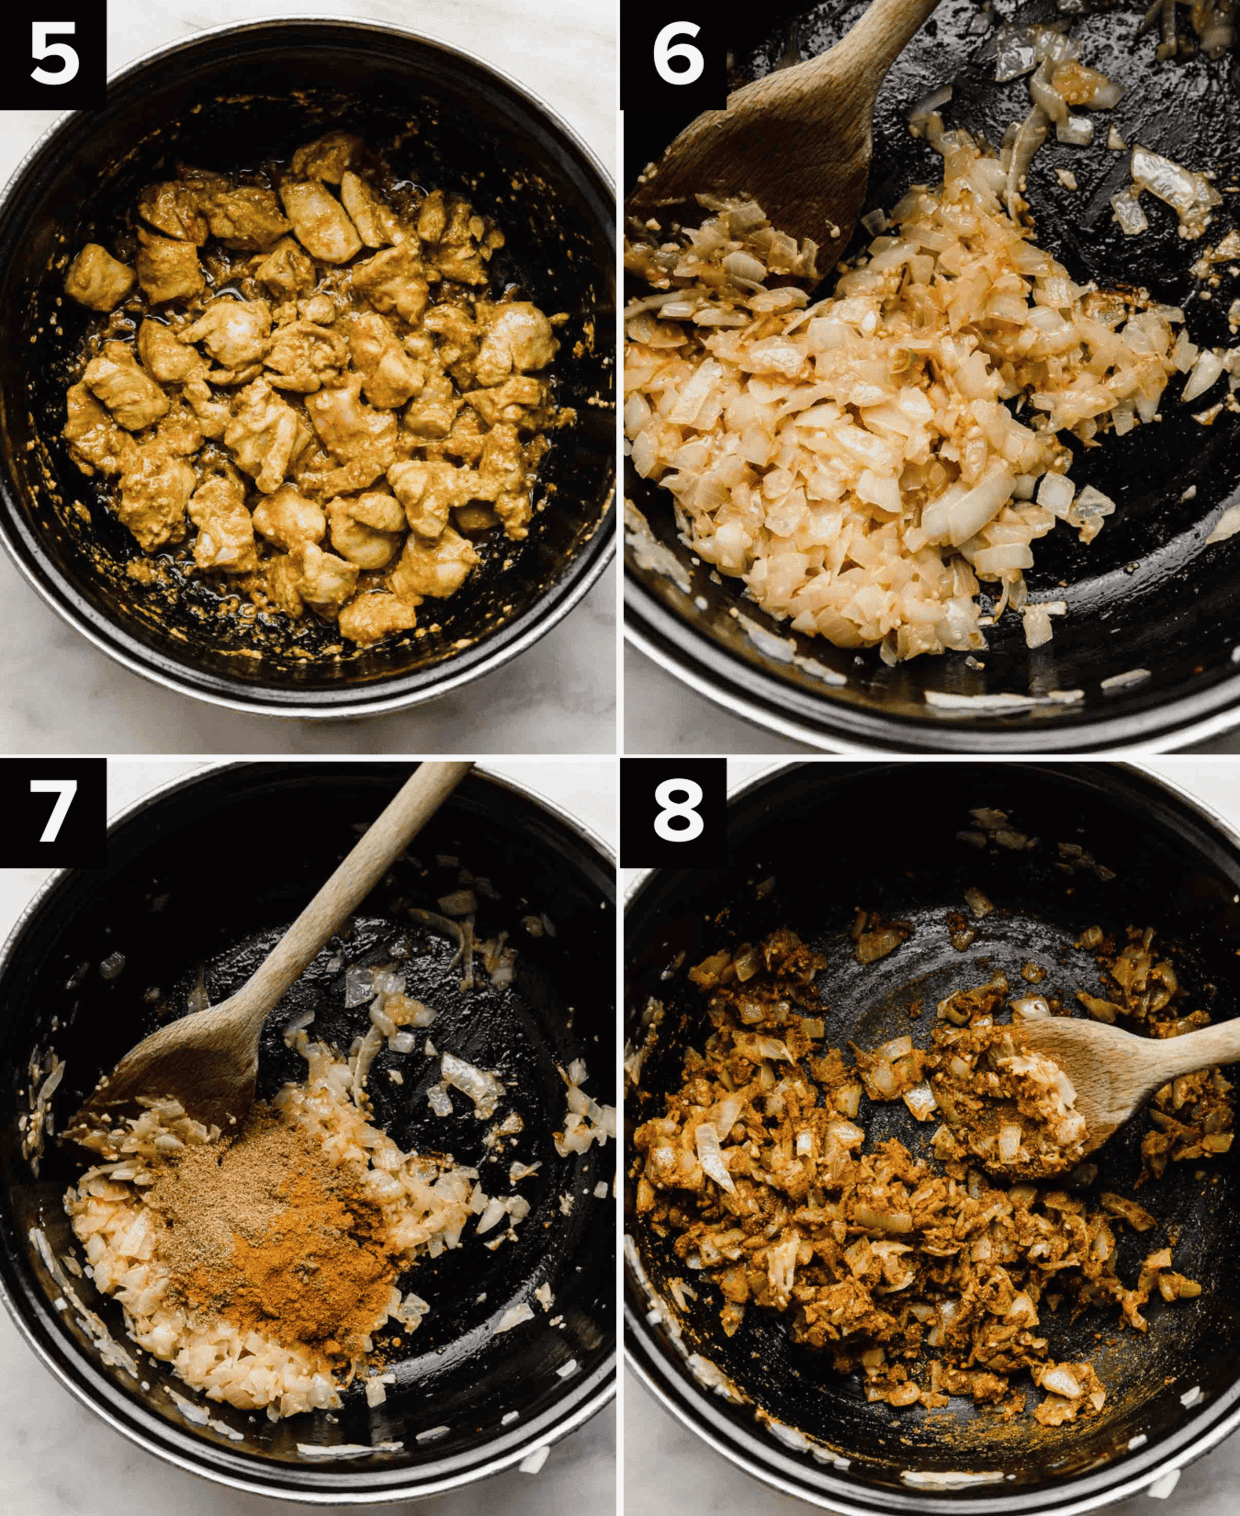 Four images showing the making of chicken thigh tikka masala; top right is chicken masala marinaded chicken in black pot, top right is onions in black pot, bottom left is diced onions and masala seasonings in a black pot, bottom right is masala spice mixture coated diced onions.